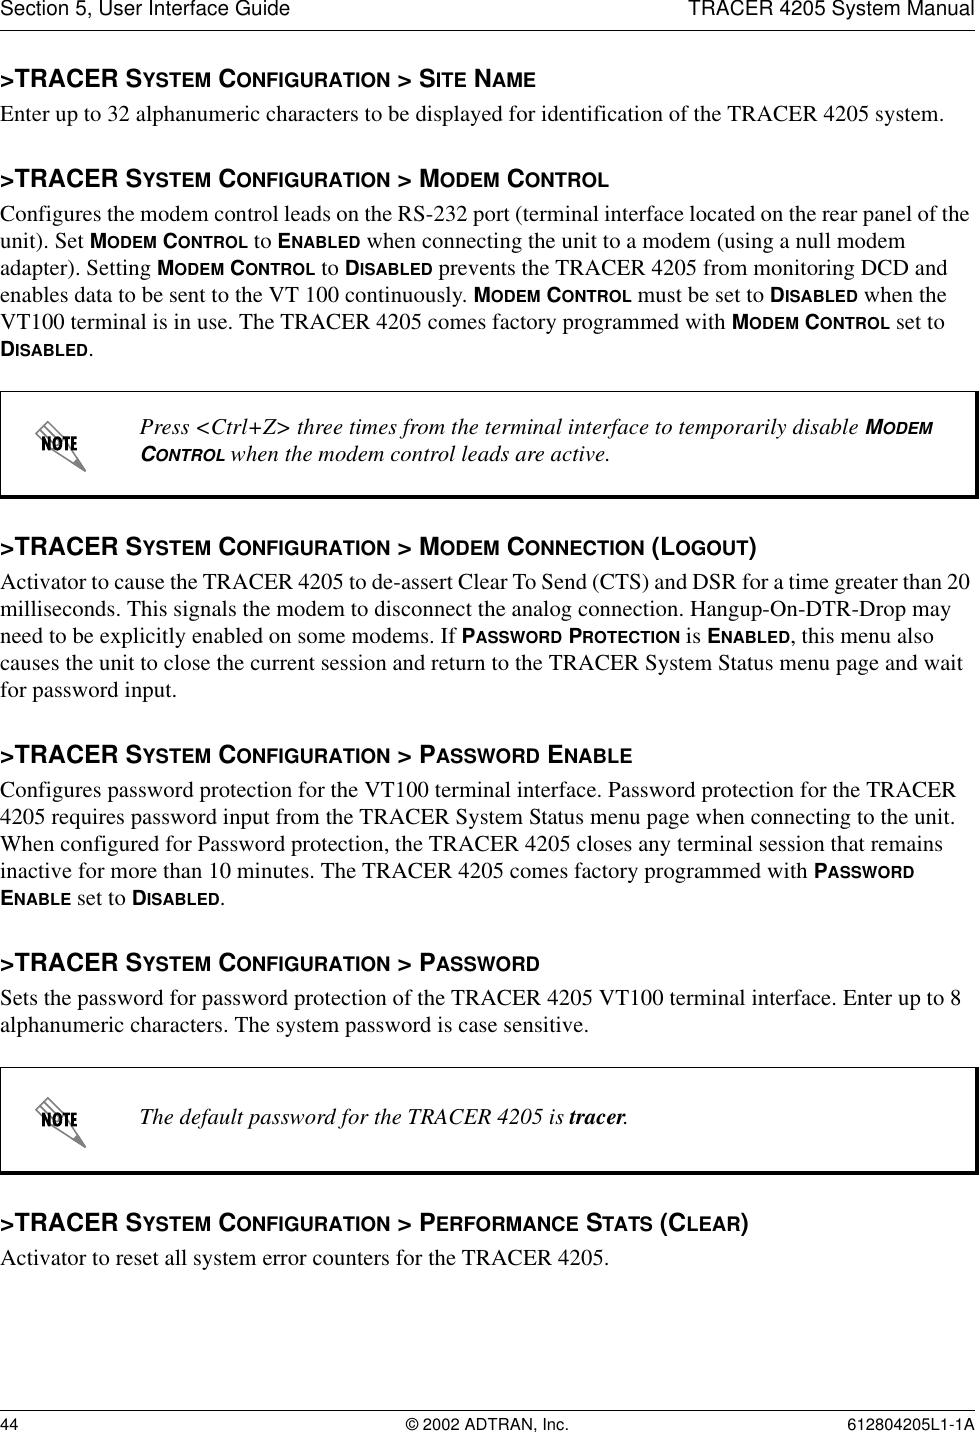 Section 5, User Interface Guide TRACER 4205 System Manual44 © 2002 ADTRAN, Inc. 612804205L1-1A&gt;TRACER SYSTEM CONFIGURATION &gt; SITE NAMEEnter up to 32 alphanumeric characters to be displayed for identification of the TRACER 4205 system. &gt;TRACER SYSTEM CONFIGURATION &gt; MODEM CONTROLConfigures the modem control leads on the RS-232 port (terminal interface located on the rear panel of the unit). Set MODEM CONTROL to ENABLED when connecting the unit to a modem (using a null modem adapter). Setting MODEM CONTROL to DISABLED prevents the TRACER 4205 from monitoring DCD and enables data to be sent to the VT 100 continuously. MODEM CONTROL must be set to DISABLED when the VT100 terminal is in use. The TRACER 4205 comes factory programmed with MODEM CONTROL set to DISABLED.&gt;TRACER SYSTEM CONFIGURATION &gt; MODEM CONNECTION (LOGOUT)Activator to cause the TRACER 4205 to de-assert Clear To Send (CTS) and DSR for a time greater than 20 milliseconds. This signals the modem to disconnect the analog connection. Hangup-On-DTR-Drop may need to be explicitly enabled on some modems. If PASSWORD PROTECTION is ENABLED, this menu also causes the unit to close the current session and return to the TRACER System Status menu page and wait for password input.&gt;TRACER SYSTEM CONFIGURATION &gt; PASSWORD ENABLEConfigures password protection for the VT100 terminal interface. Password protection for the TRACER 4205 requires password input from the TRACER System Status menu page when connecting to the unit. When configured for Password protection, the TRACER 4205 closes any terminal session that remains inactive for more than 10 minutes. The TRACER 4205 comes factory programmed with PASSWORD ENABLE set to DISABLED. &gt;TRACER SYSTEM CONFIGURATION &gt; PASSWORDSets the password for password protection of the TRACER 4205 VT100 terminal interface. Enter up to 8 alphanumeric characters. The system password is case sensitive.&gt;TRACER SYSTEM CONFIGURATION &gt; PERFORMANCE STATS (CLEAR)Activator to reset all system error counters for the TRACER 4205.Press &lt;Ctrl+Z&gt; three times from the terminal interface to temporarily disable MODEM CONTROL when the modem control leads are active.The default password for the TRACER 4205 is tracer.